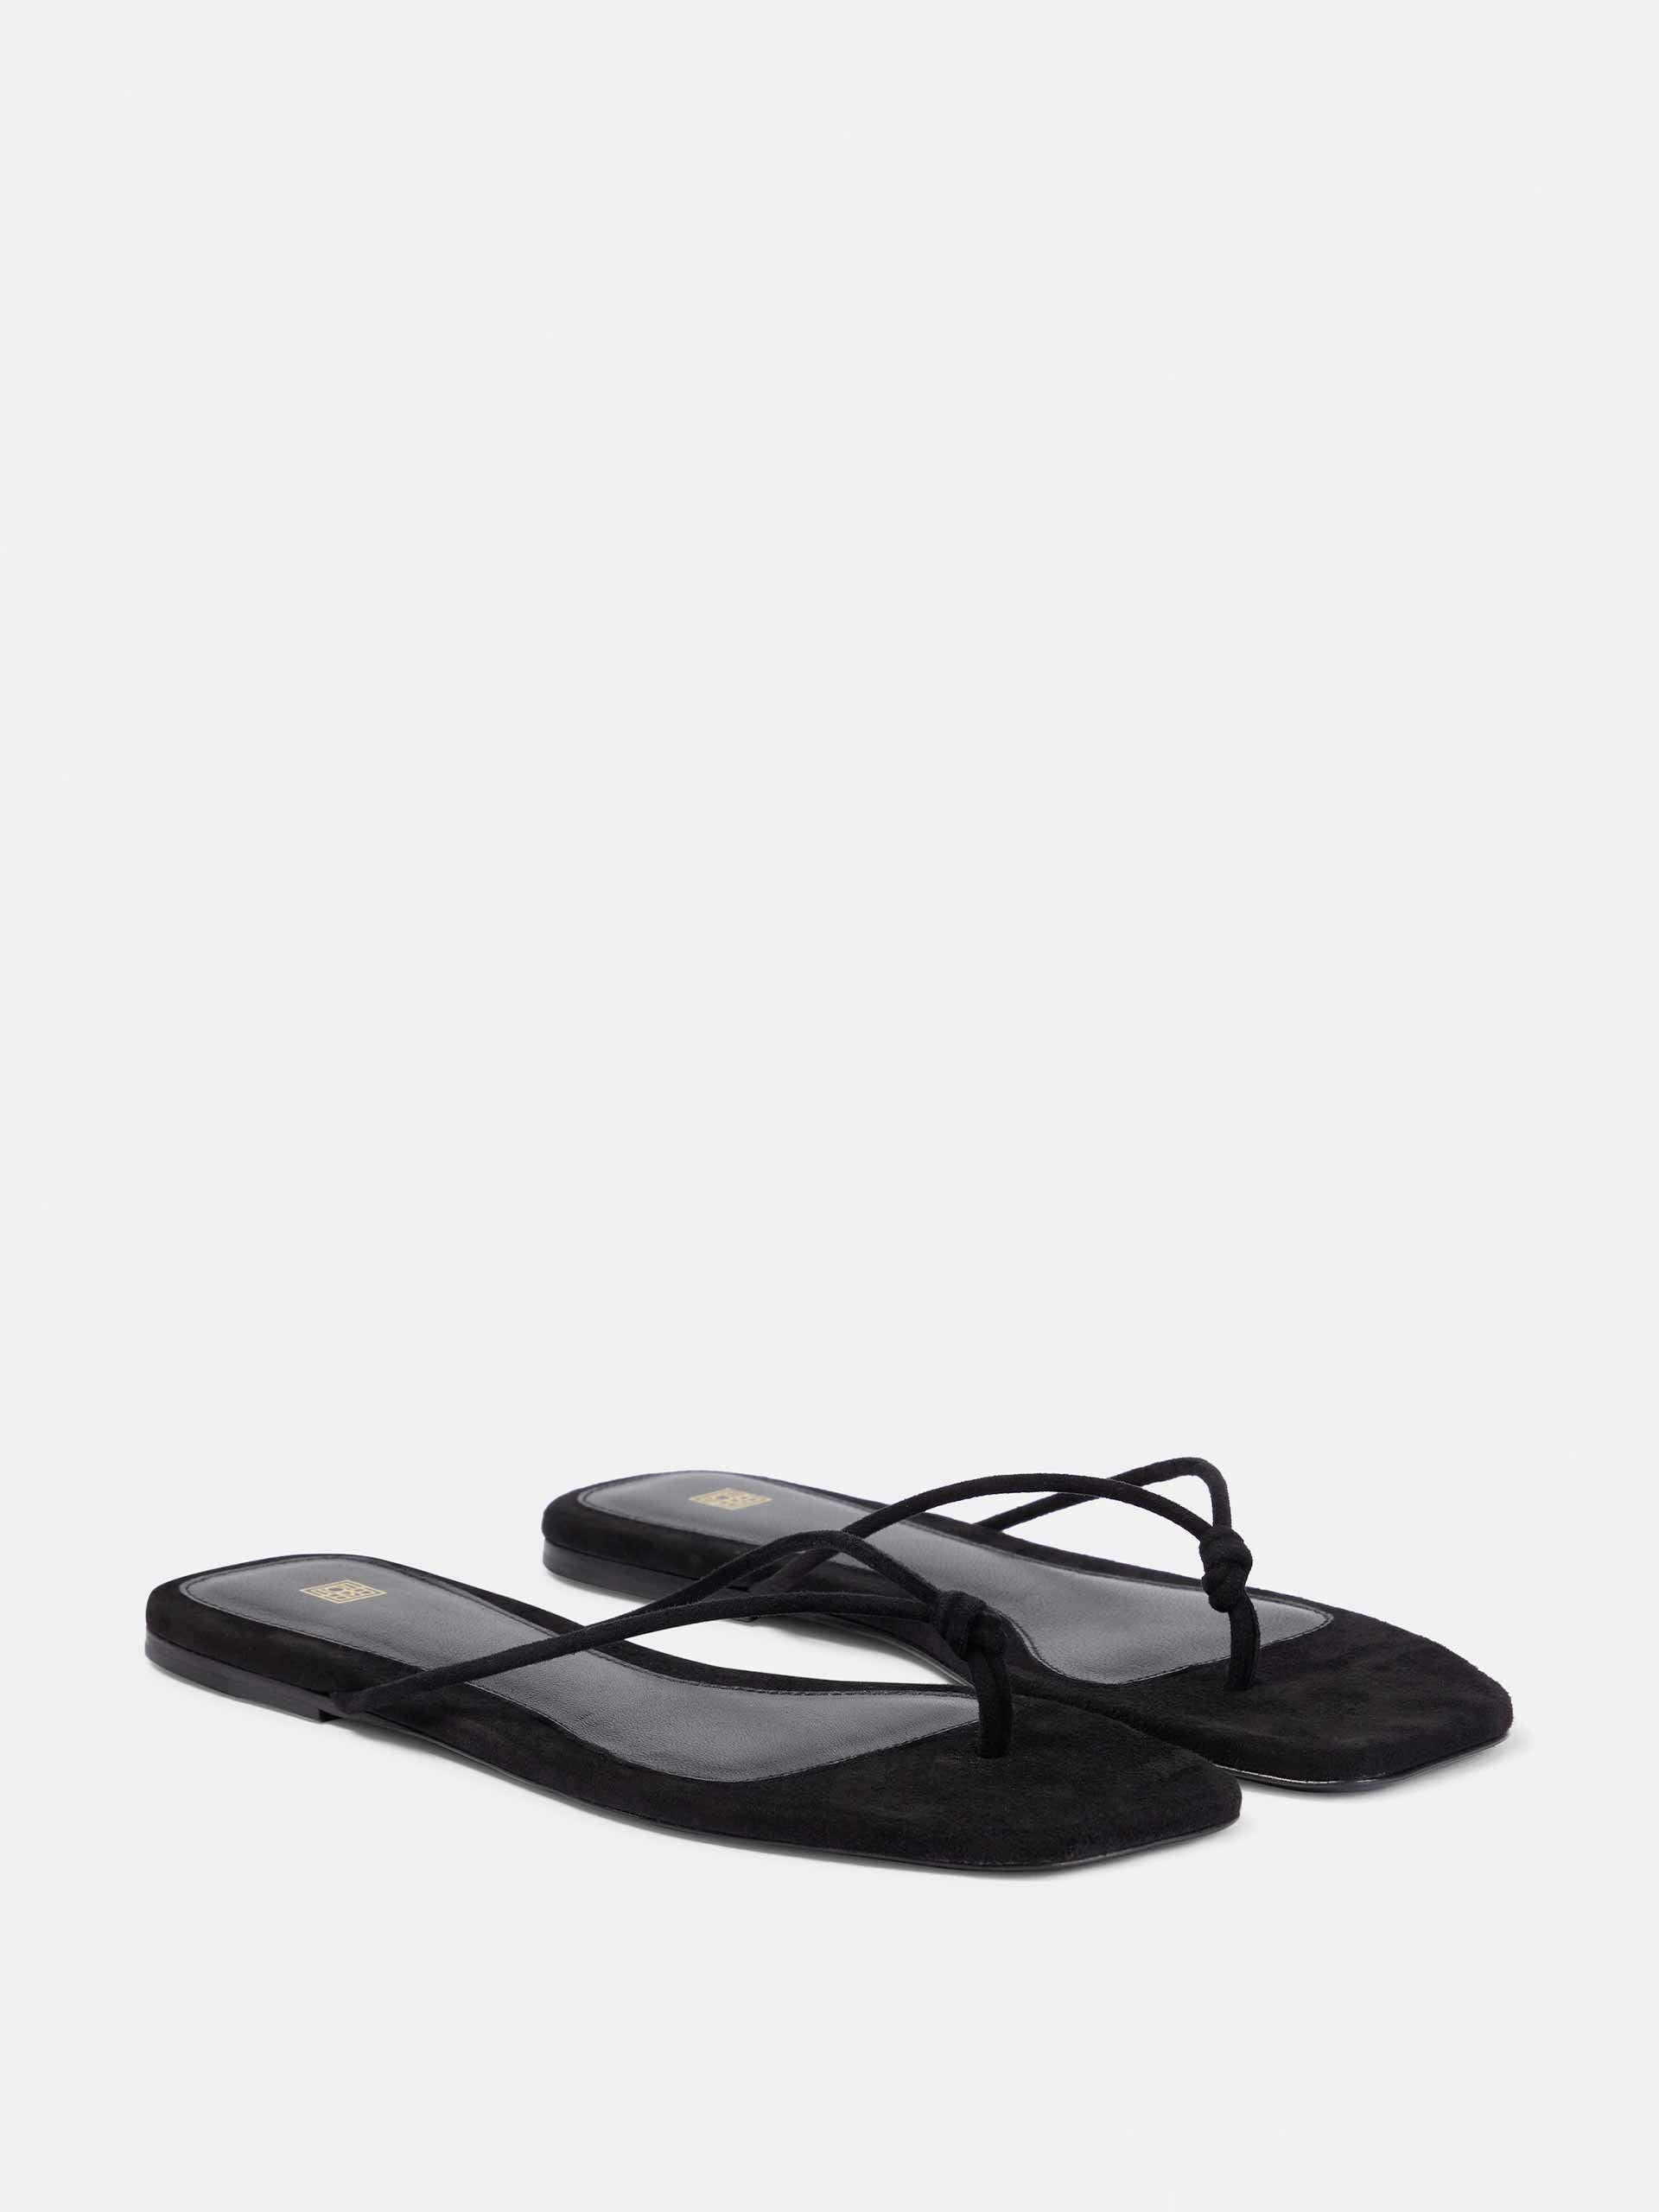 The Knot suede thong sandals